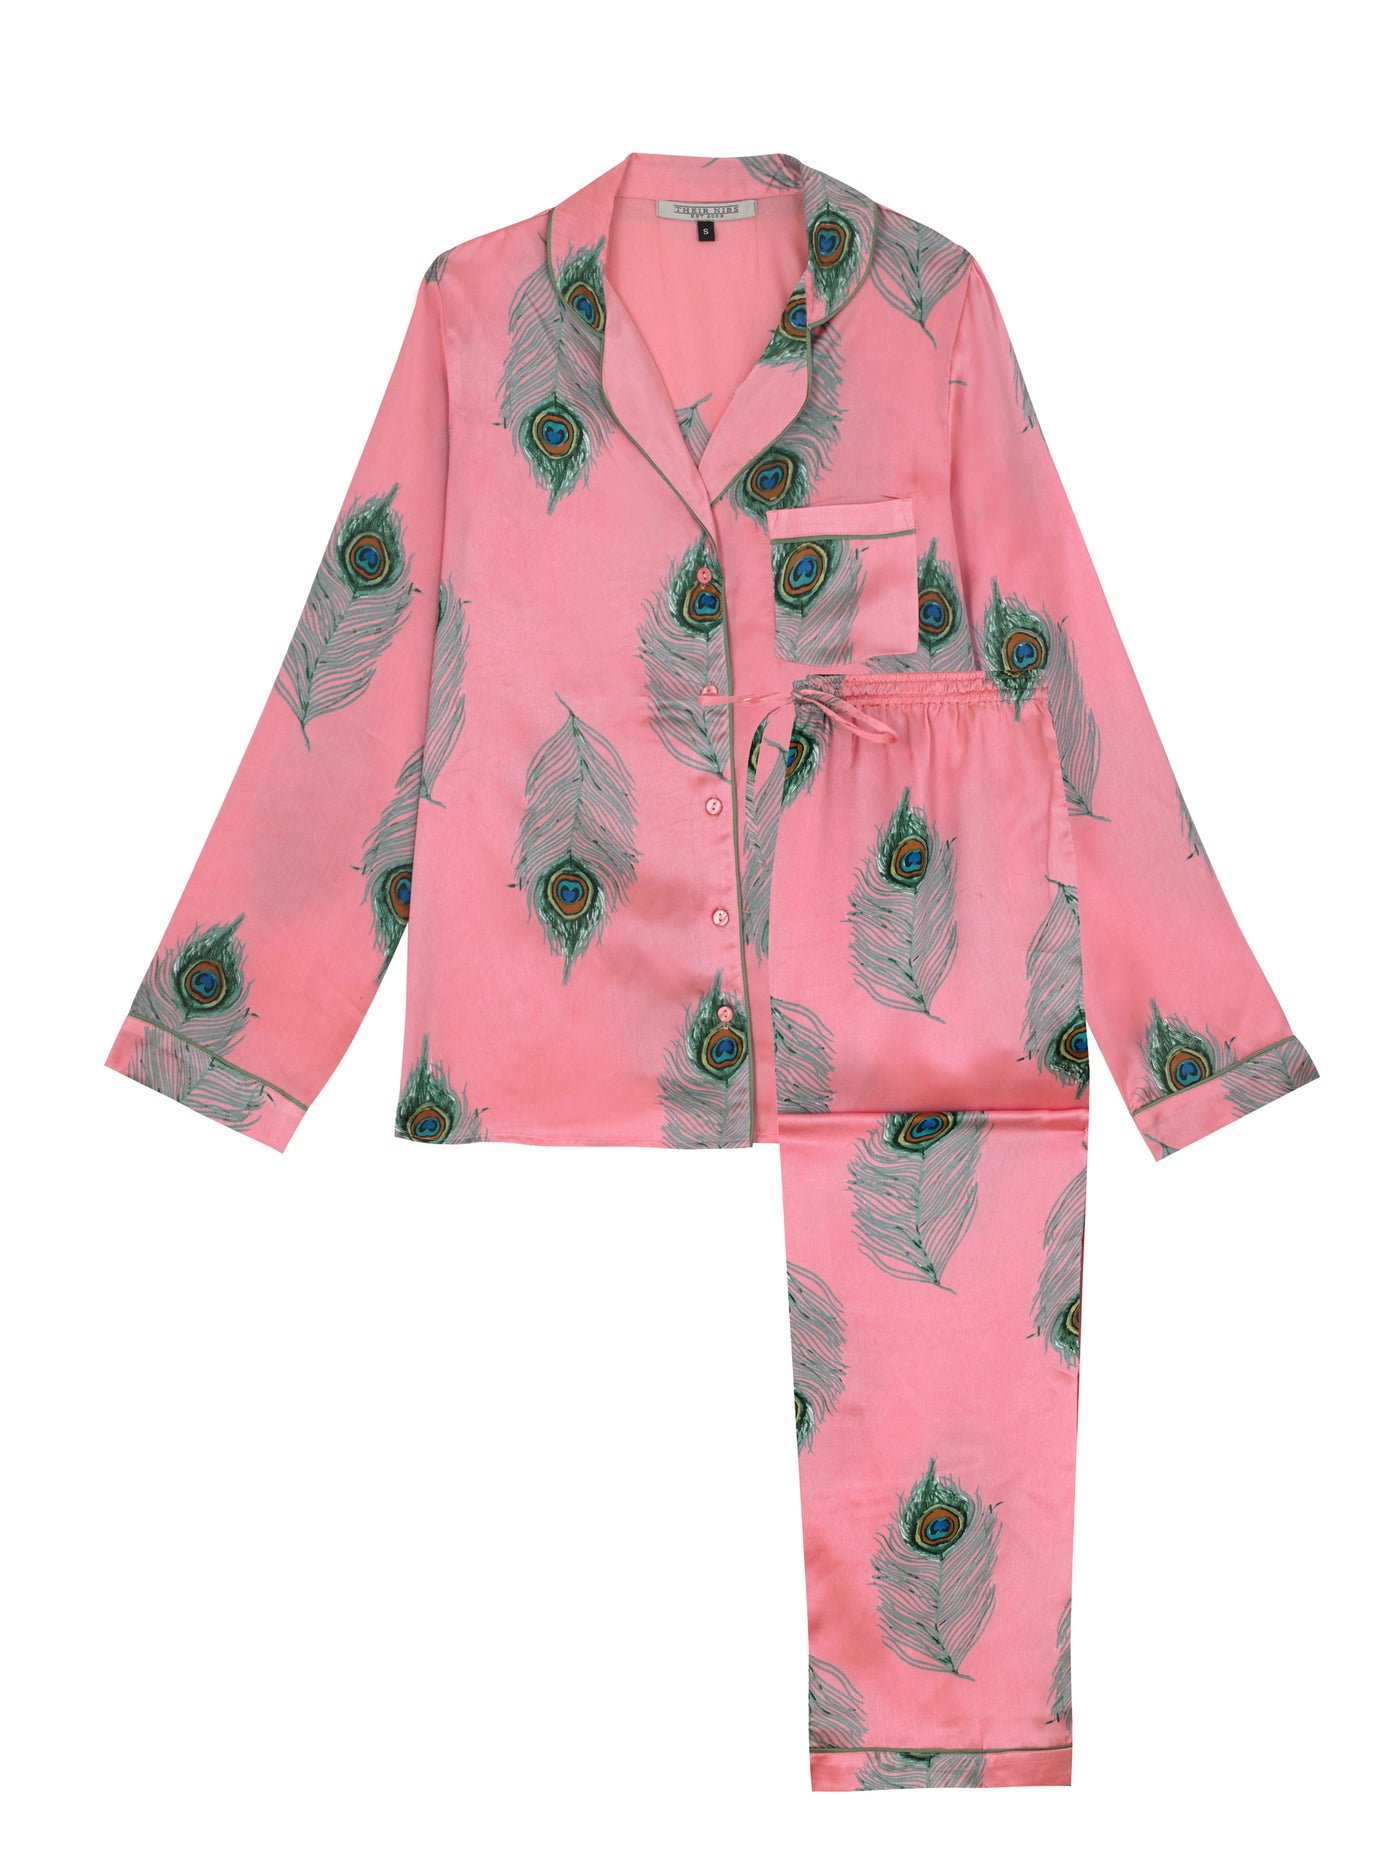 Flat shot of warm pink based ladies traditional satin pyjamas, with repeating green peacock feather pattern, green piping on cuffs and collar